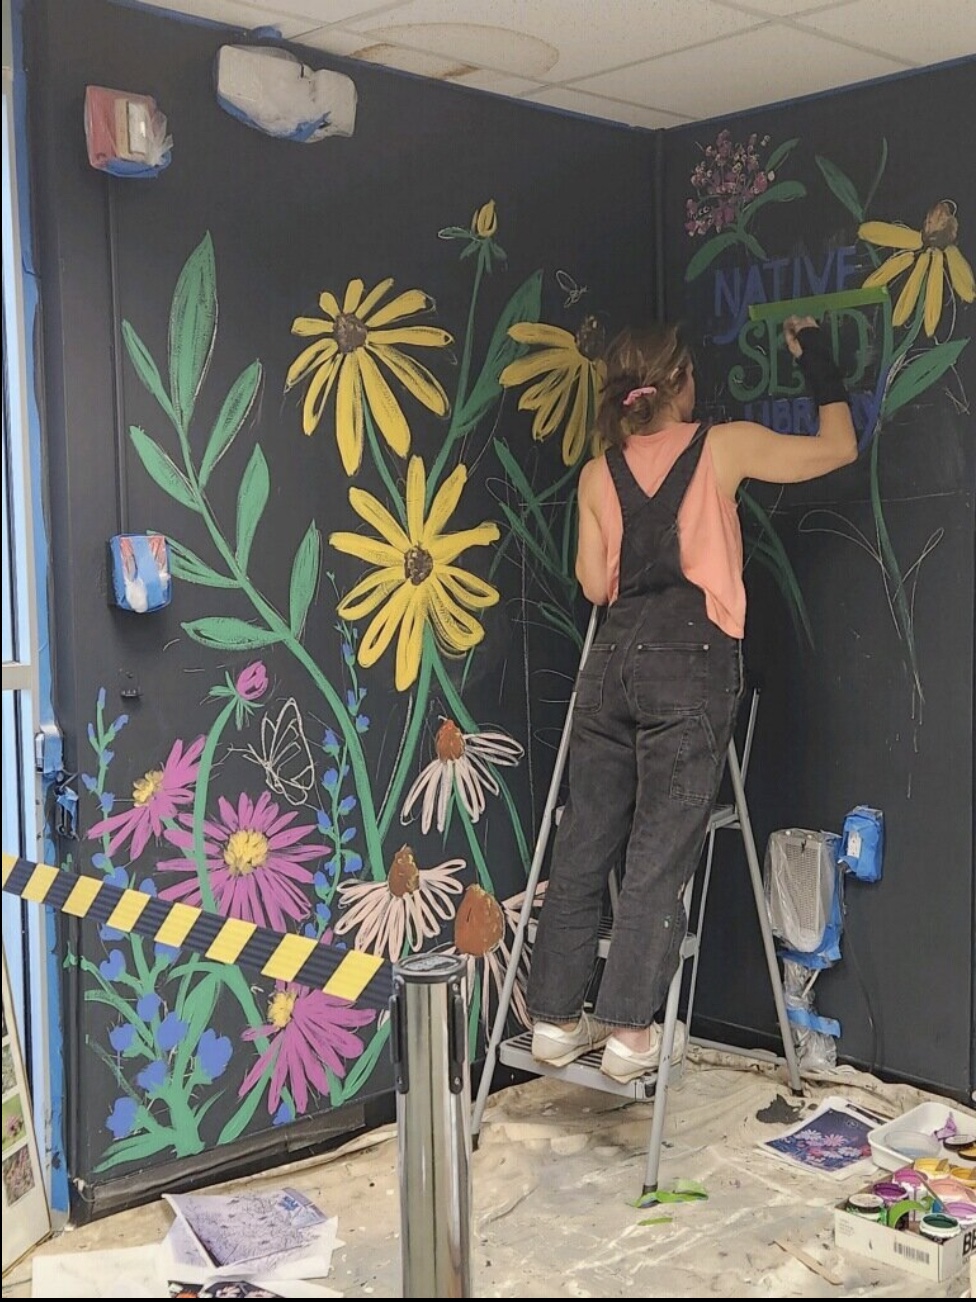 A person stands on a step ladder and paints a colorful floral mural on a black wall.